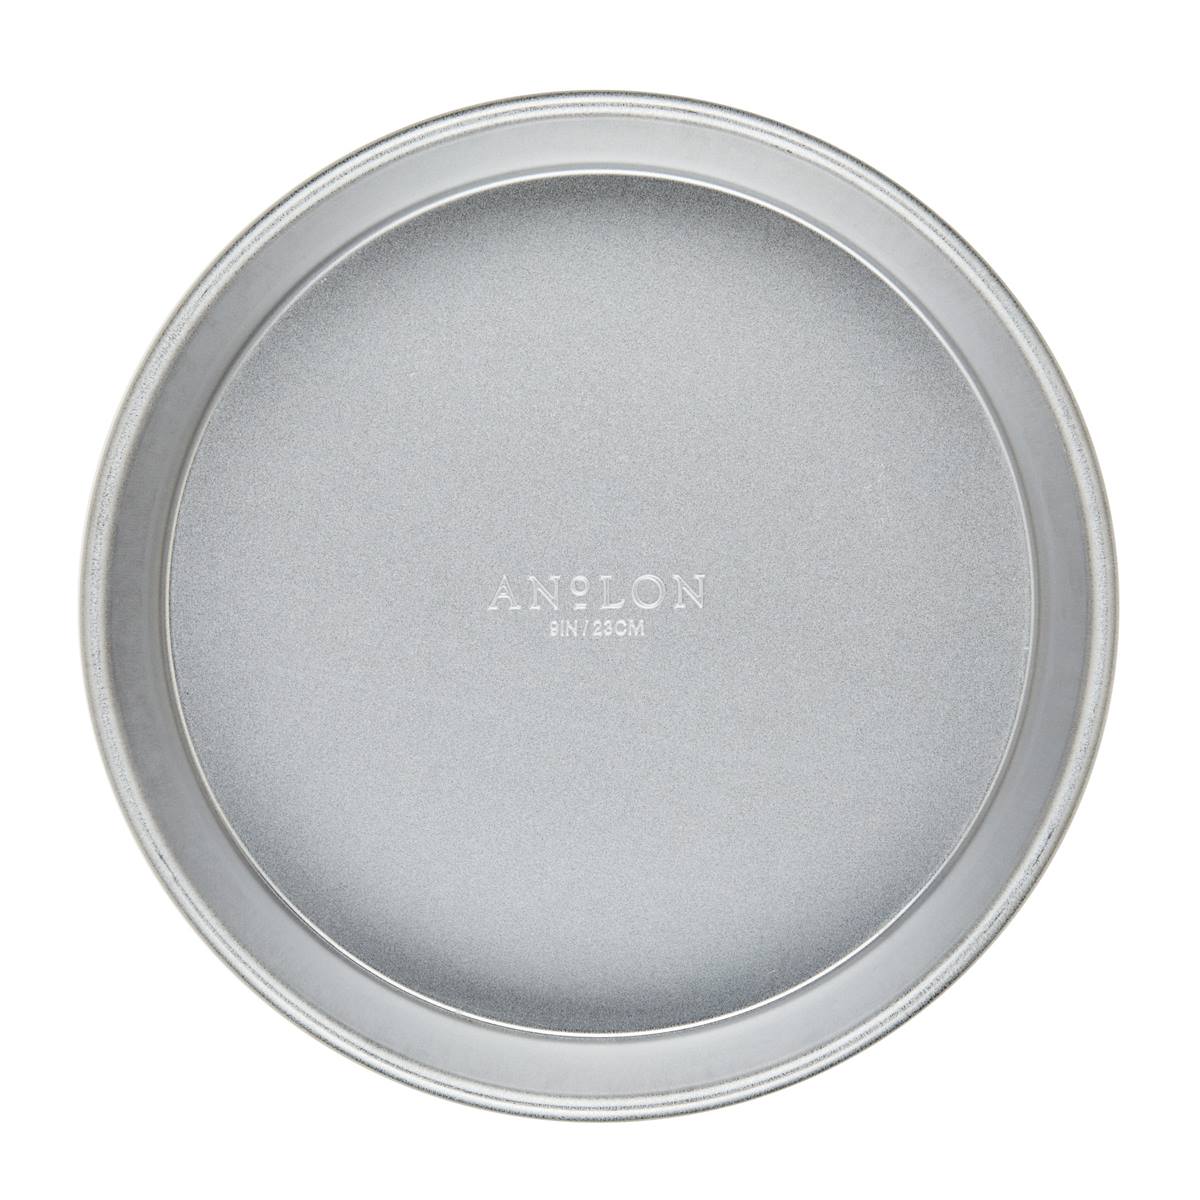 Anolon(R) Professional Bakeware 9in. Round Cake Pan